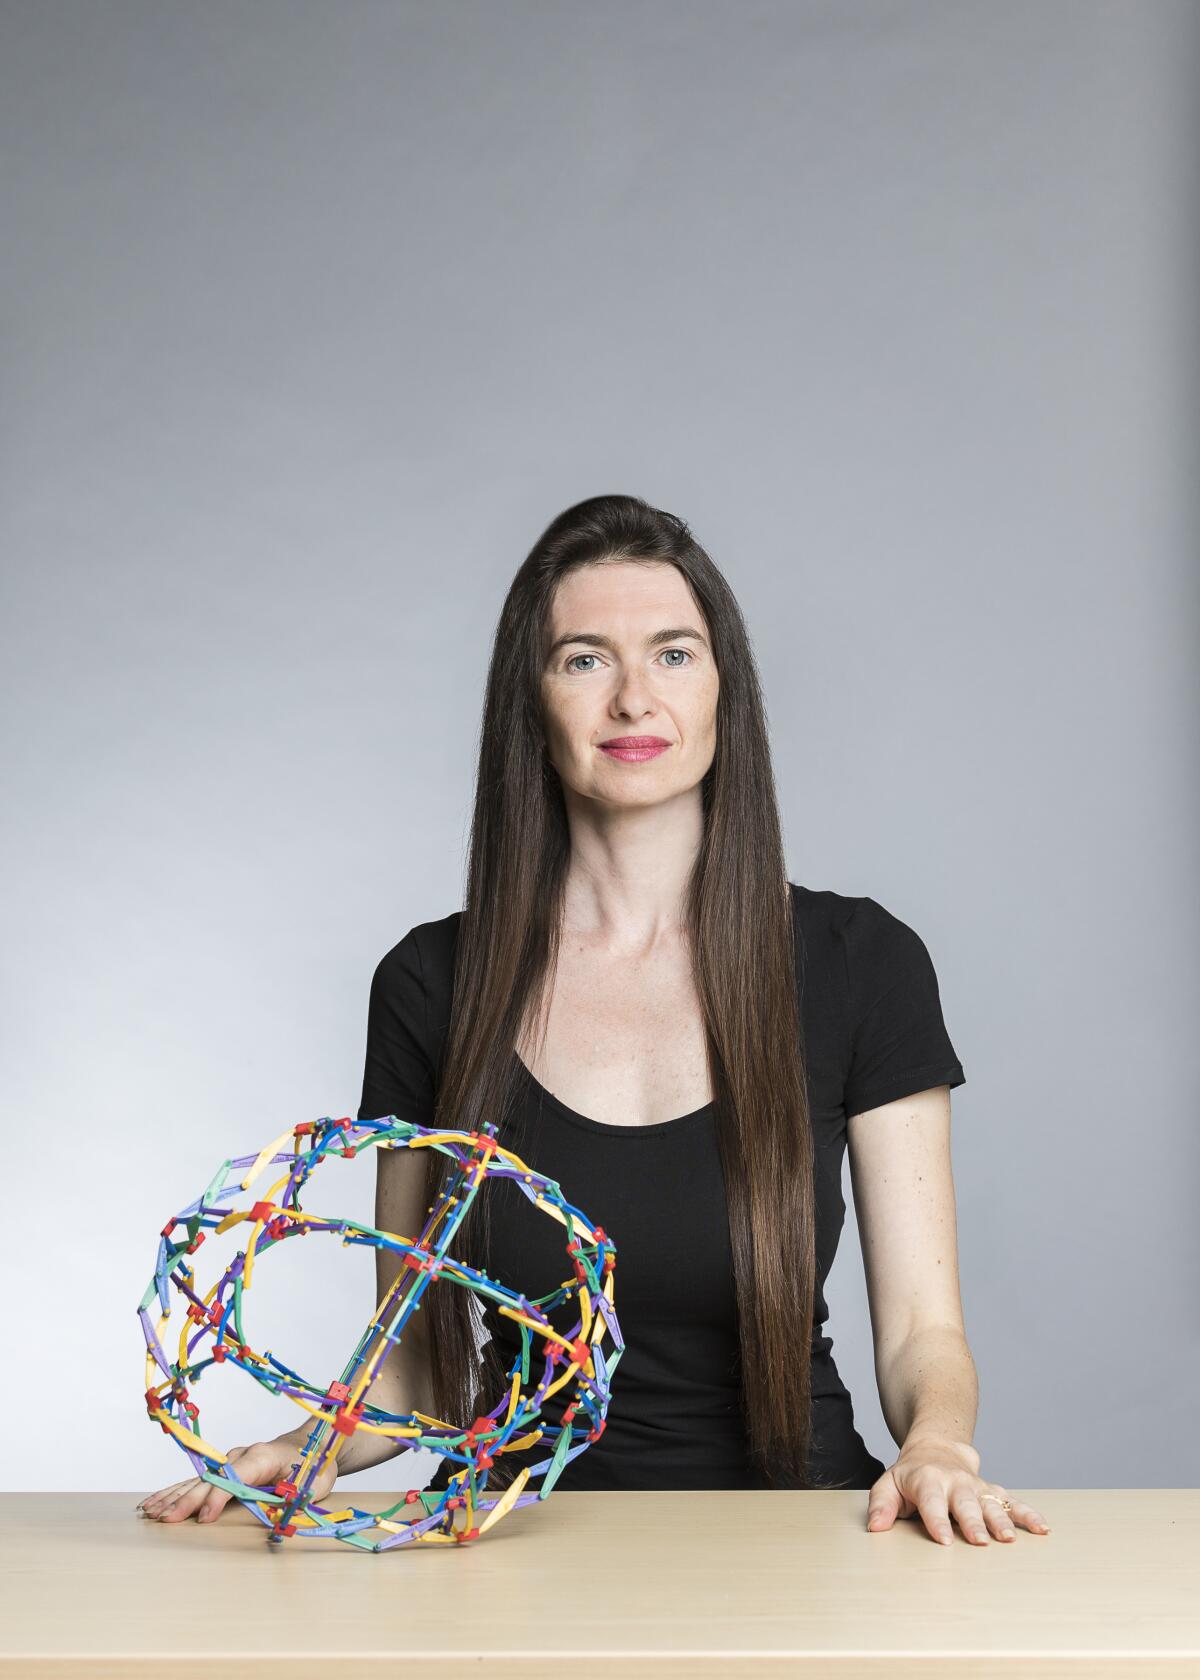 A woman in a black T-shirt stands behind a table with an expandable ball toy on it.